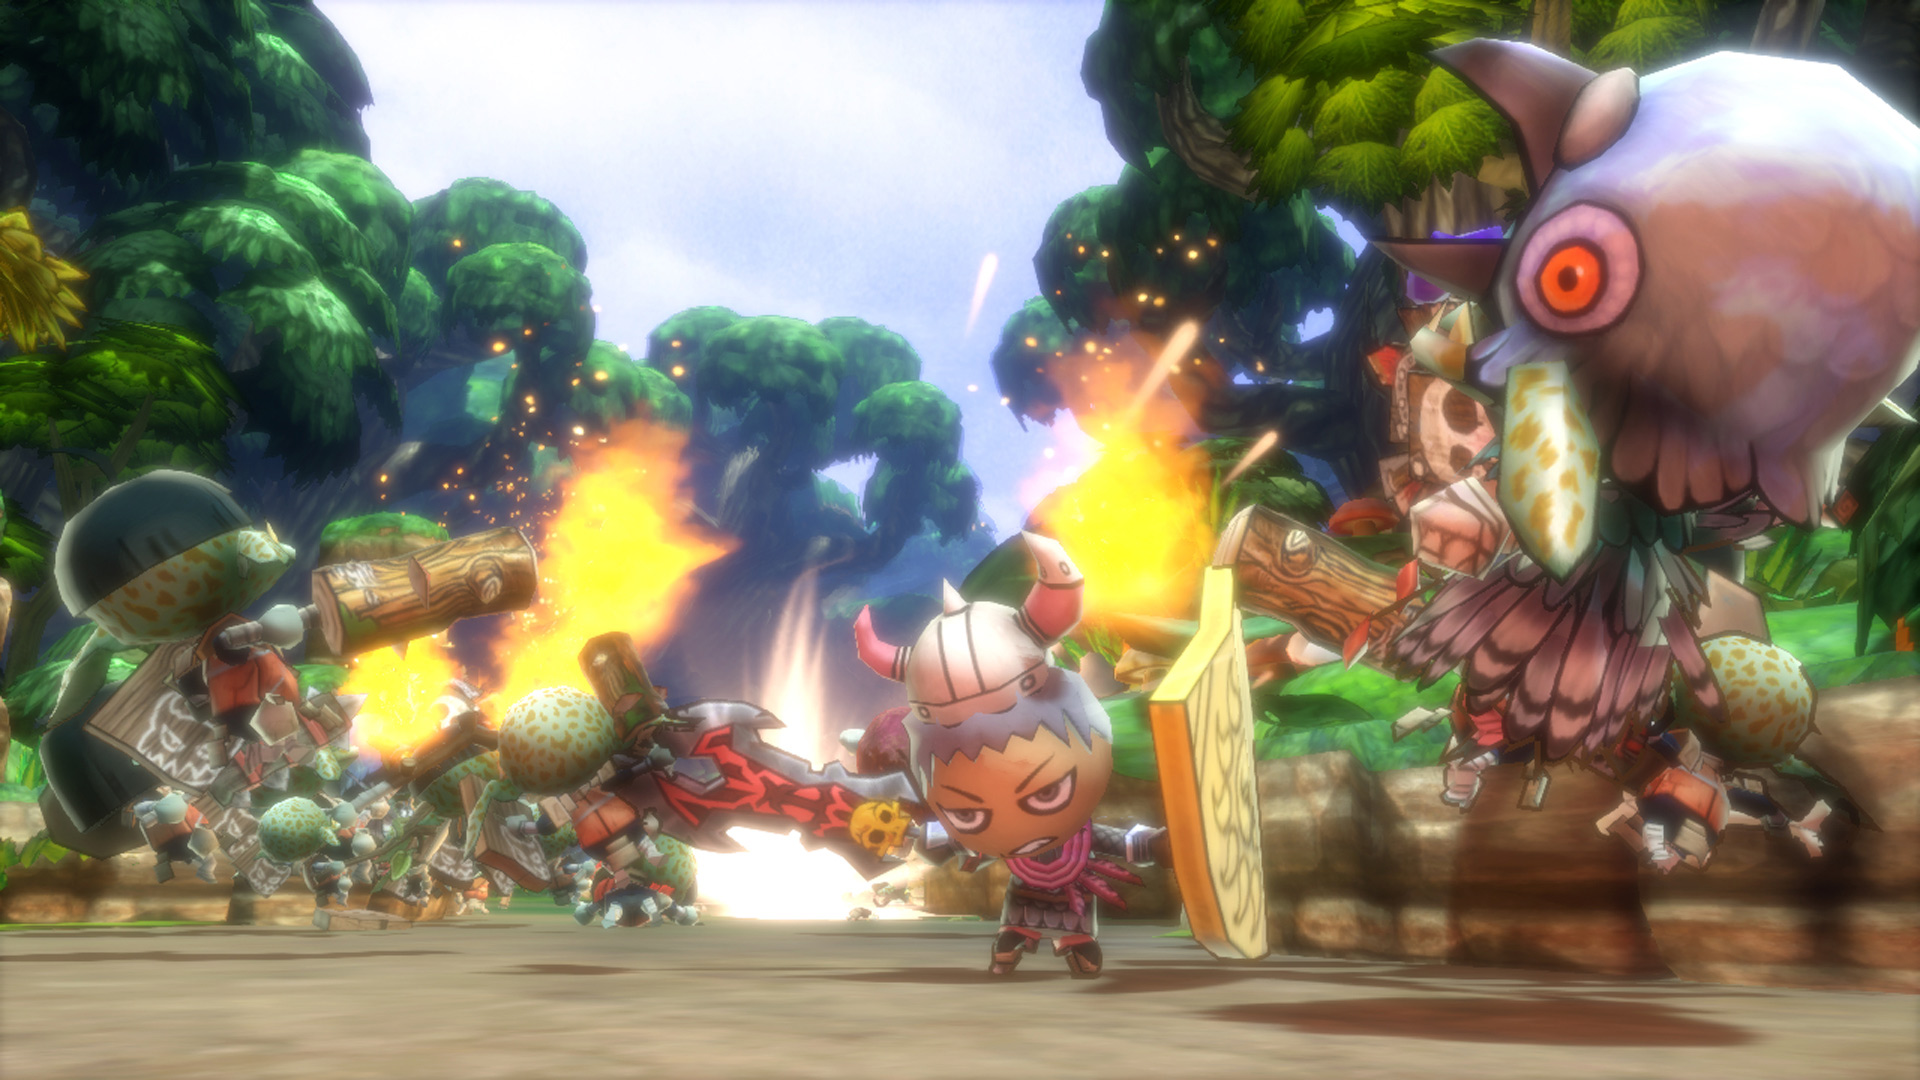 Happy Dungeons shown at E3 2015